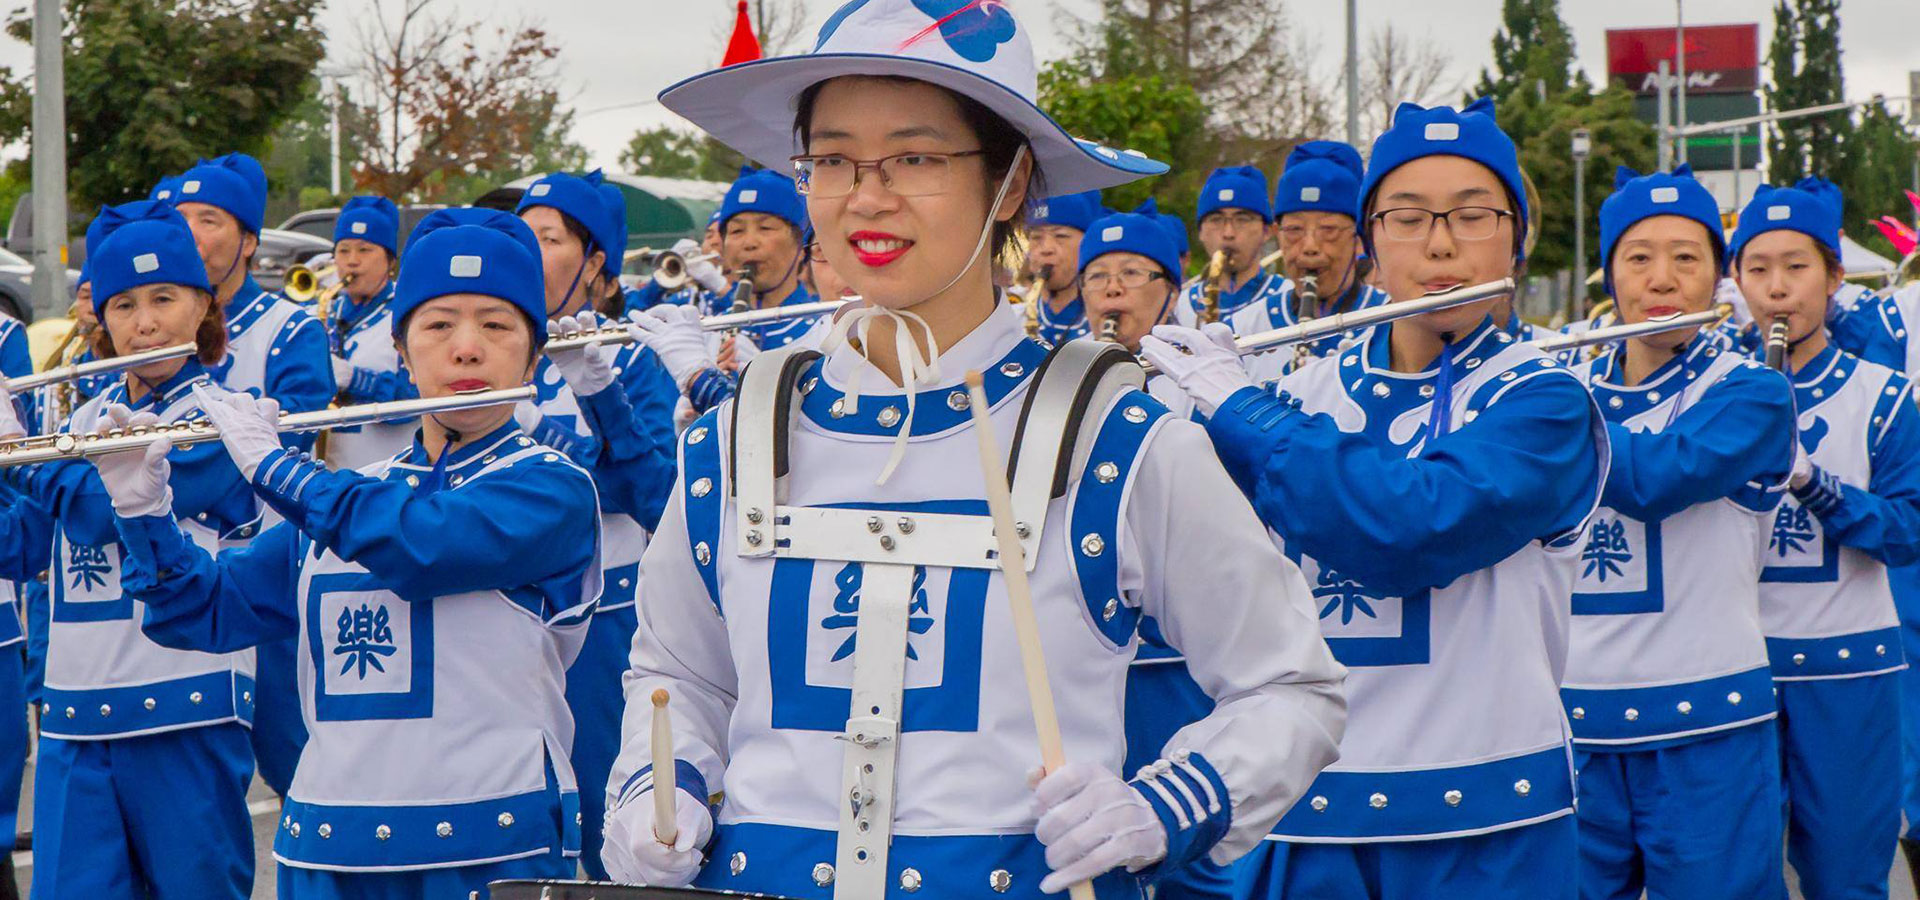 image of a marching band at the Welland rose Parade